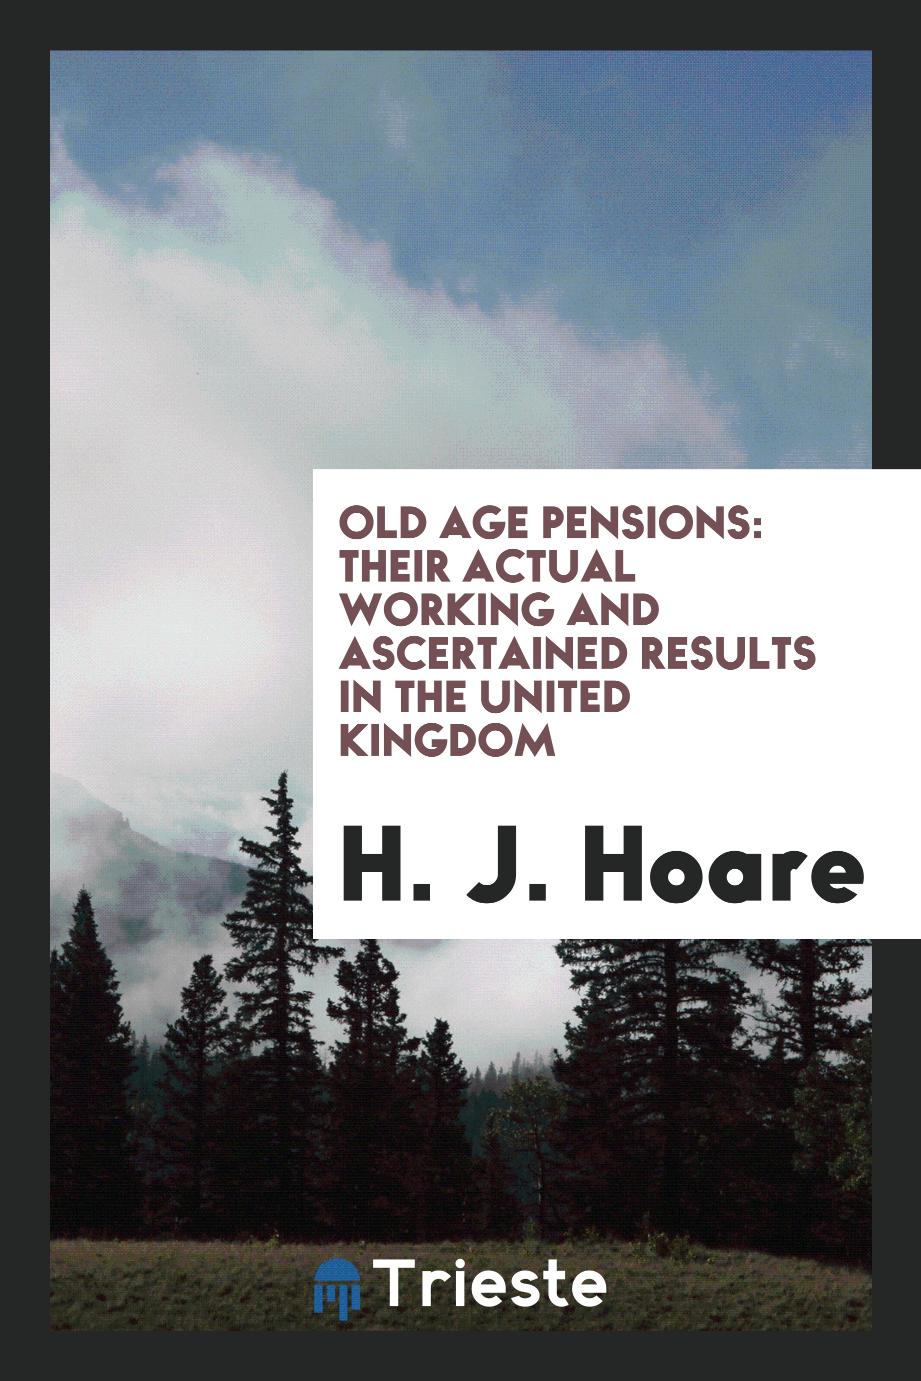 Old age pensions: Their Actual Working and Ascertained Results in the United Kingdom